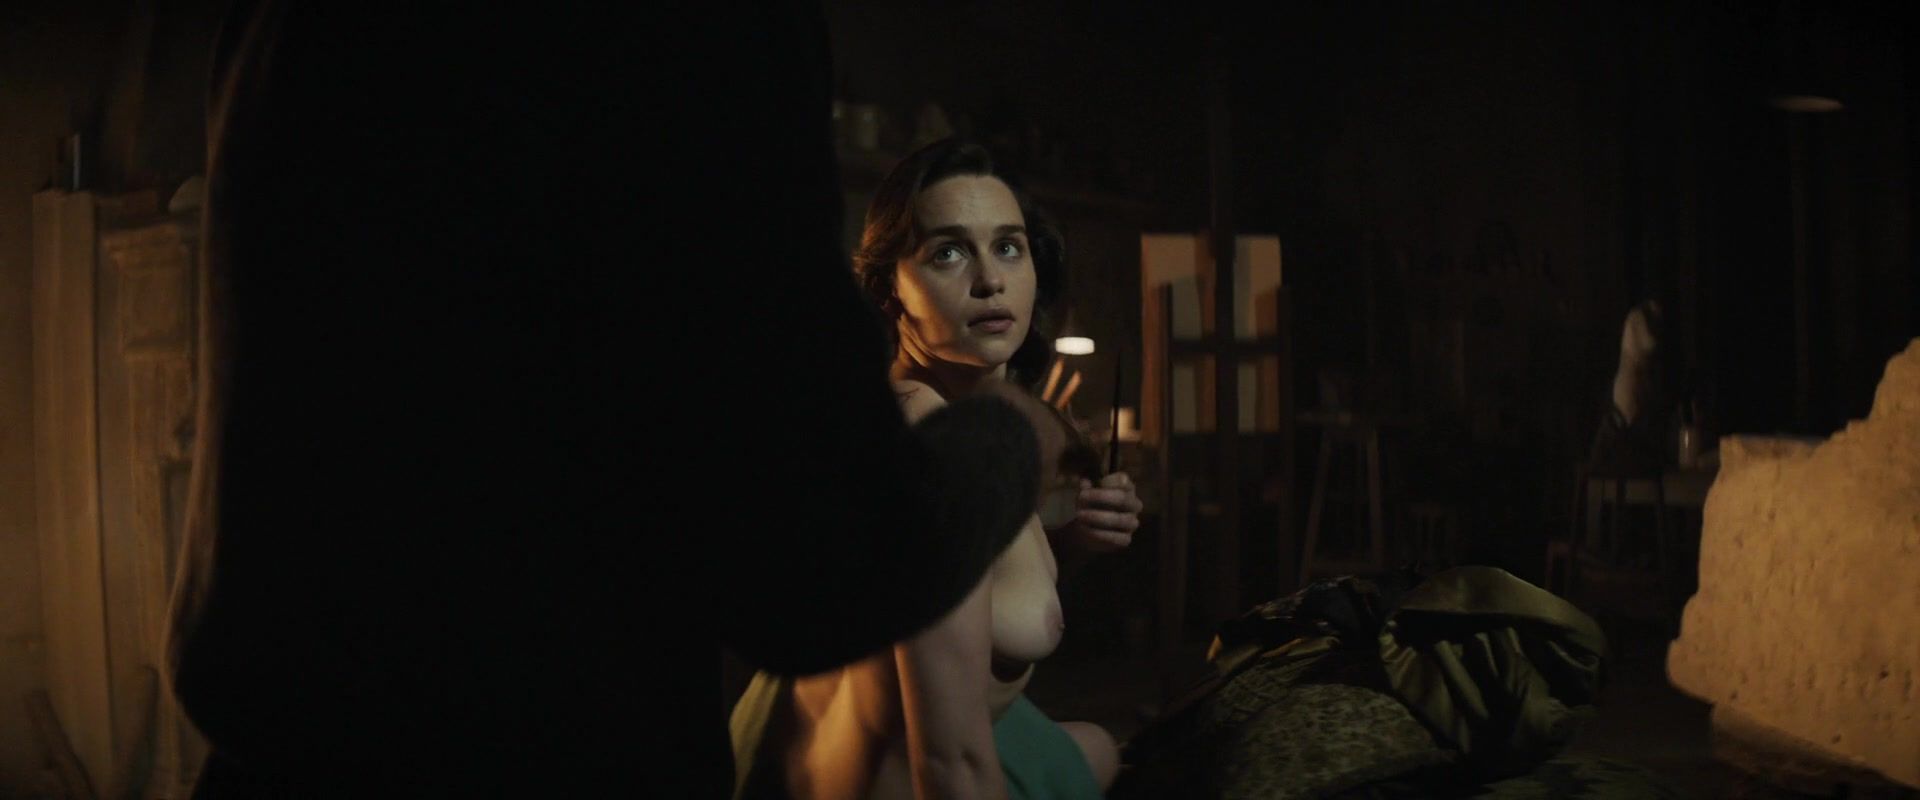 Sexy Naked Emilia Clarke in topless scene of the movie "Voice from the Stone" | Released in 2017 FamousBoard